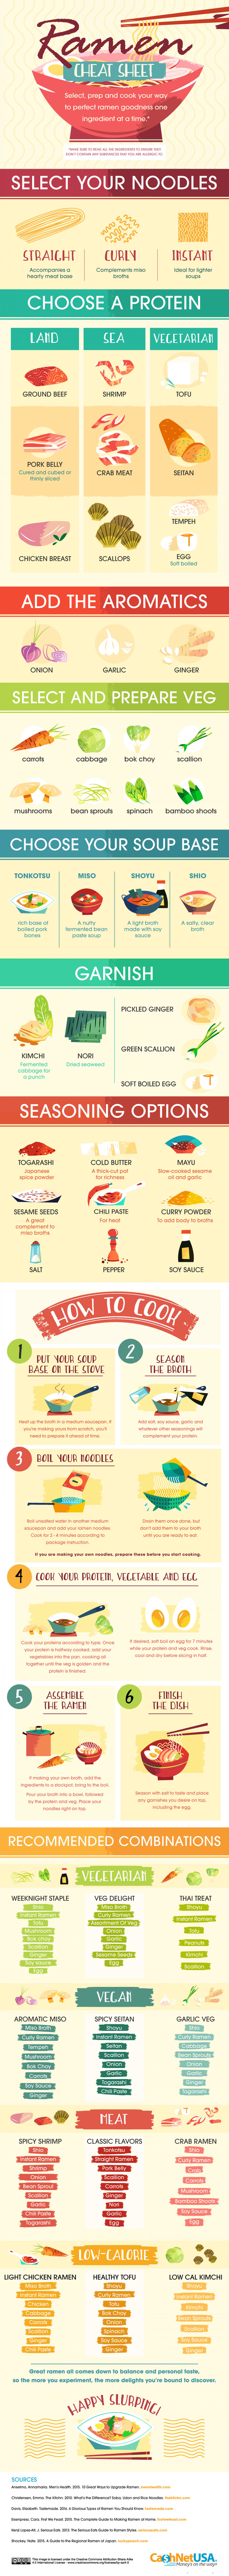 What's Good to Add to Ramen Noodles Infographic